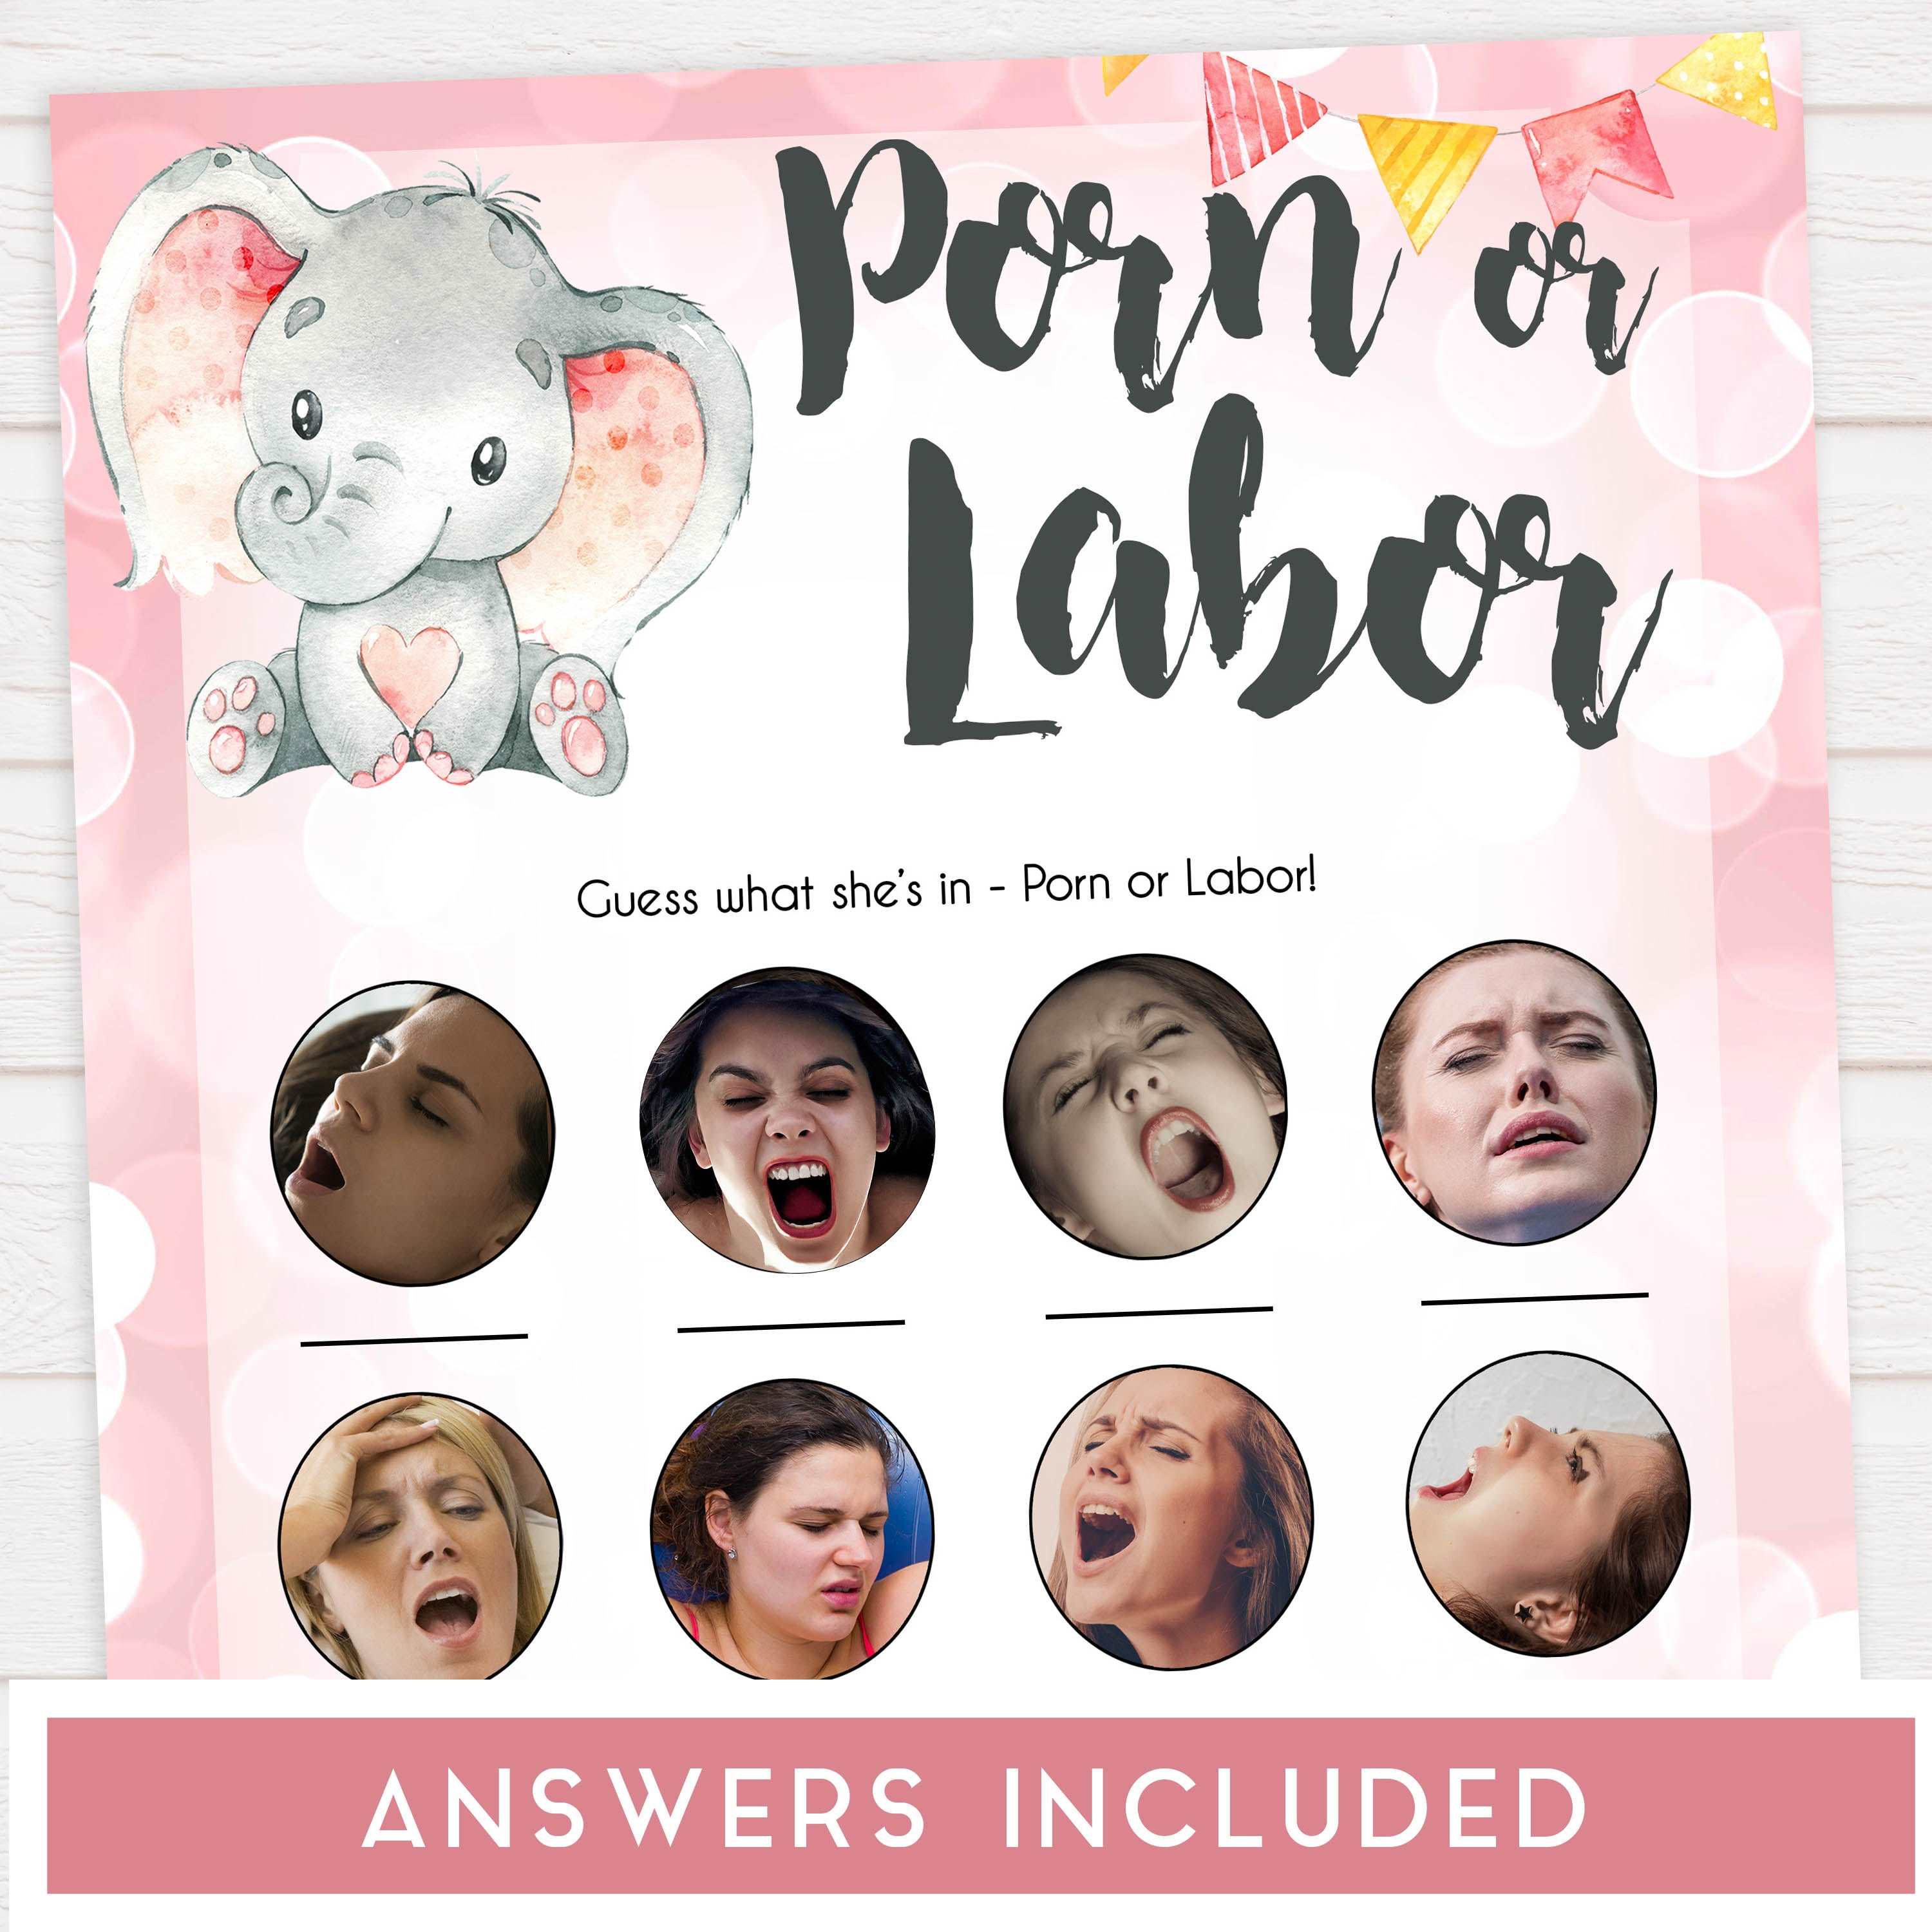 labor or porn, baby bump or beer belly game, Printable baby shower games, fun abby games, baby shower games, fun baby shower ideas, top baby shower ideas, pink elephant baby shower, pink baby shower ideas